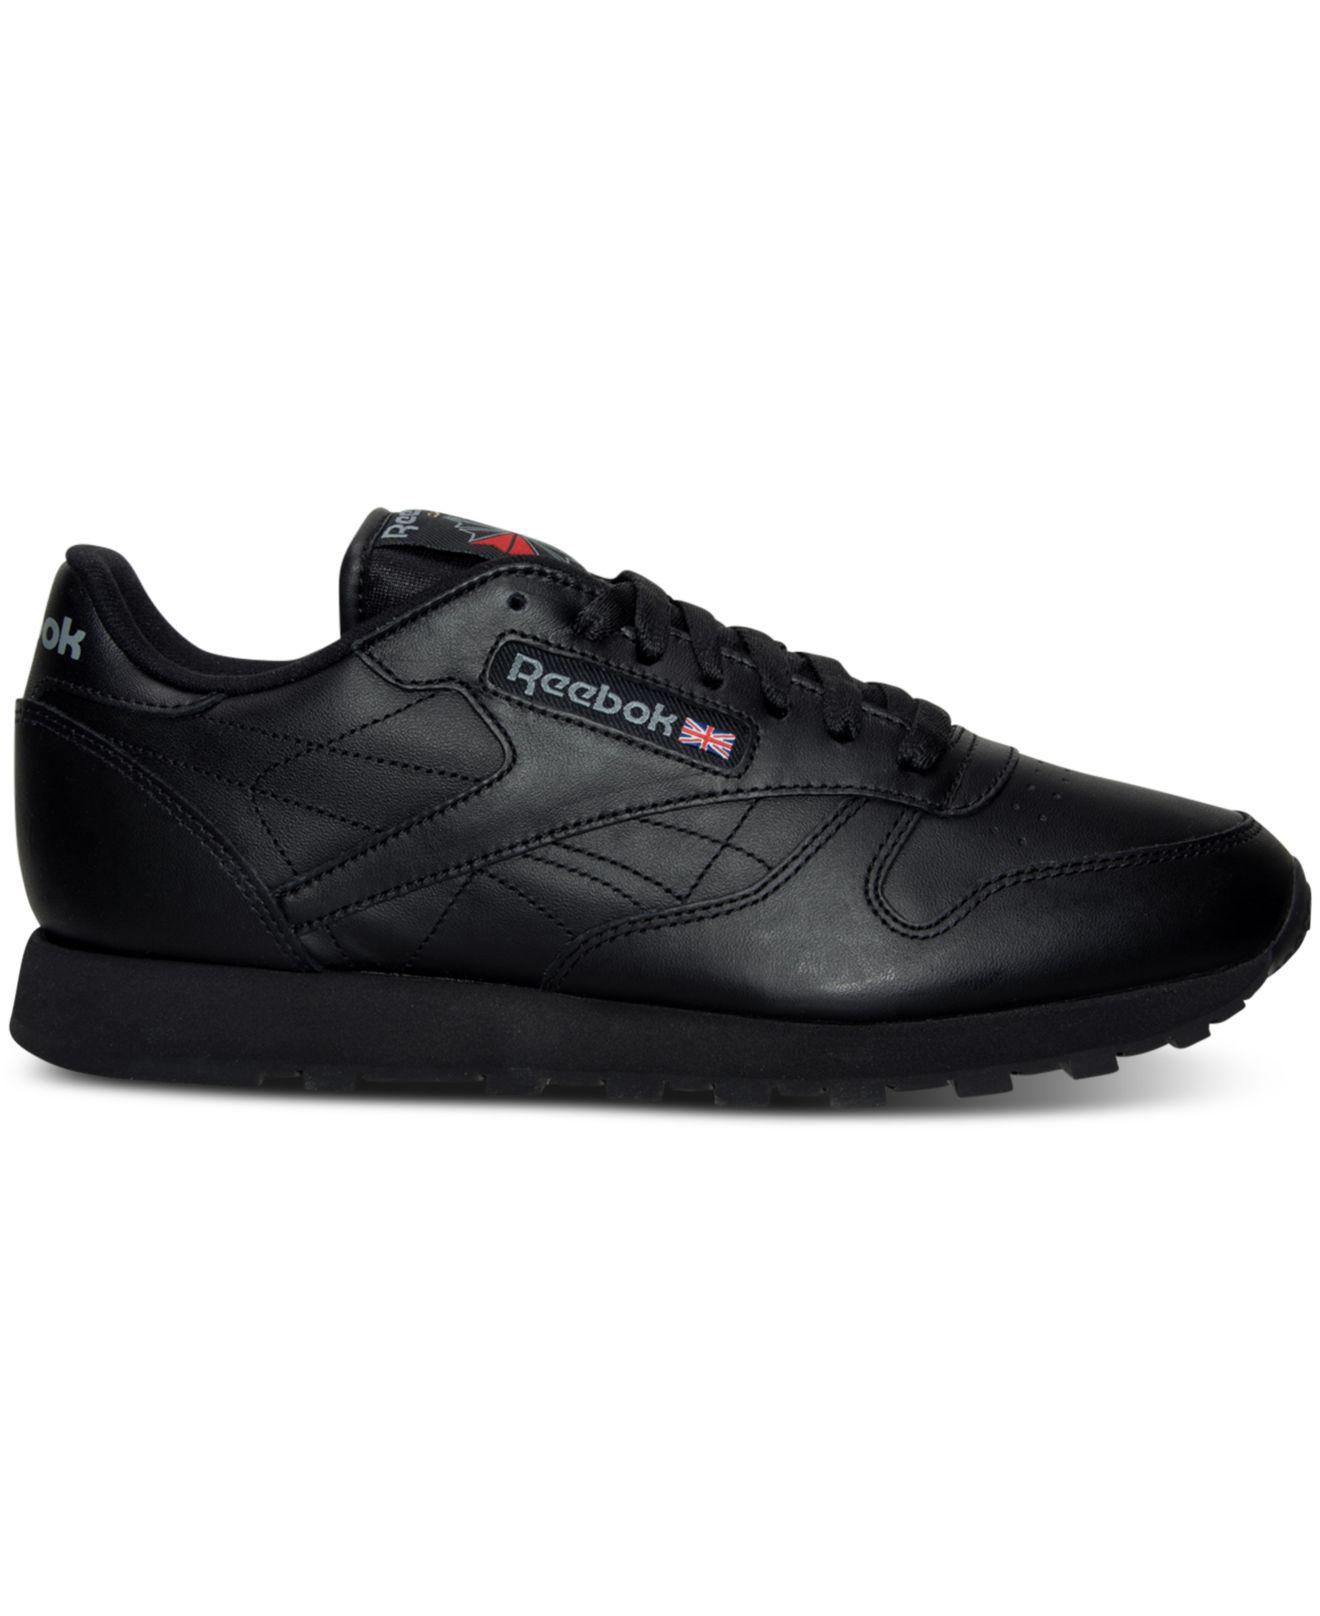 Lyst - Reebok Classic Leather Sneakers in Black for Men